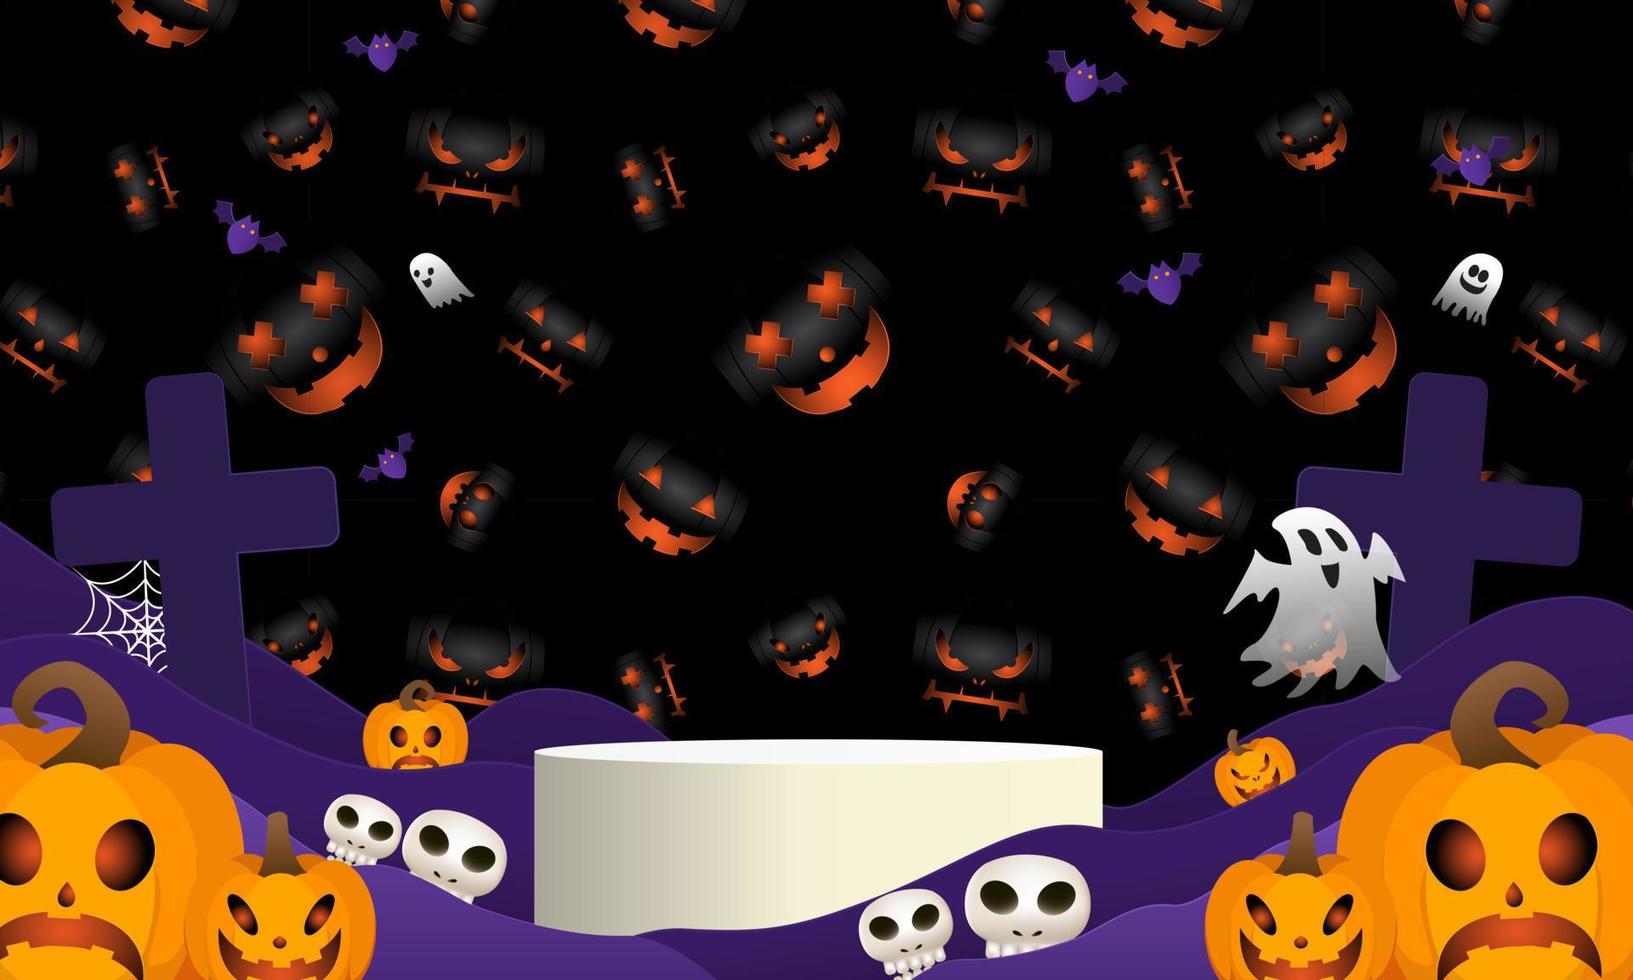 Halloween background For a party and sale on Halloween night.Happy Halloween banner. vector